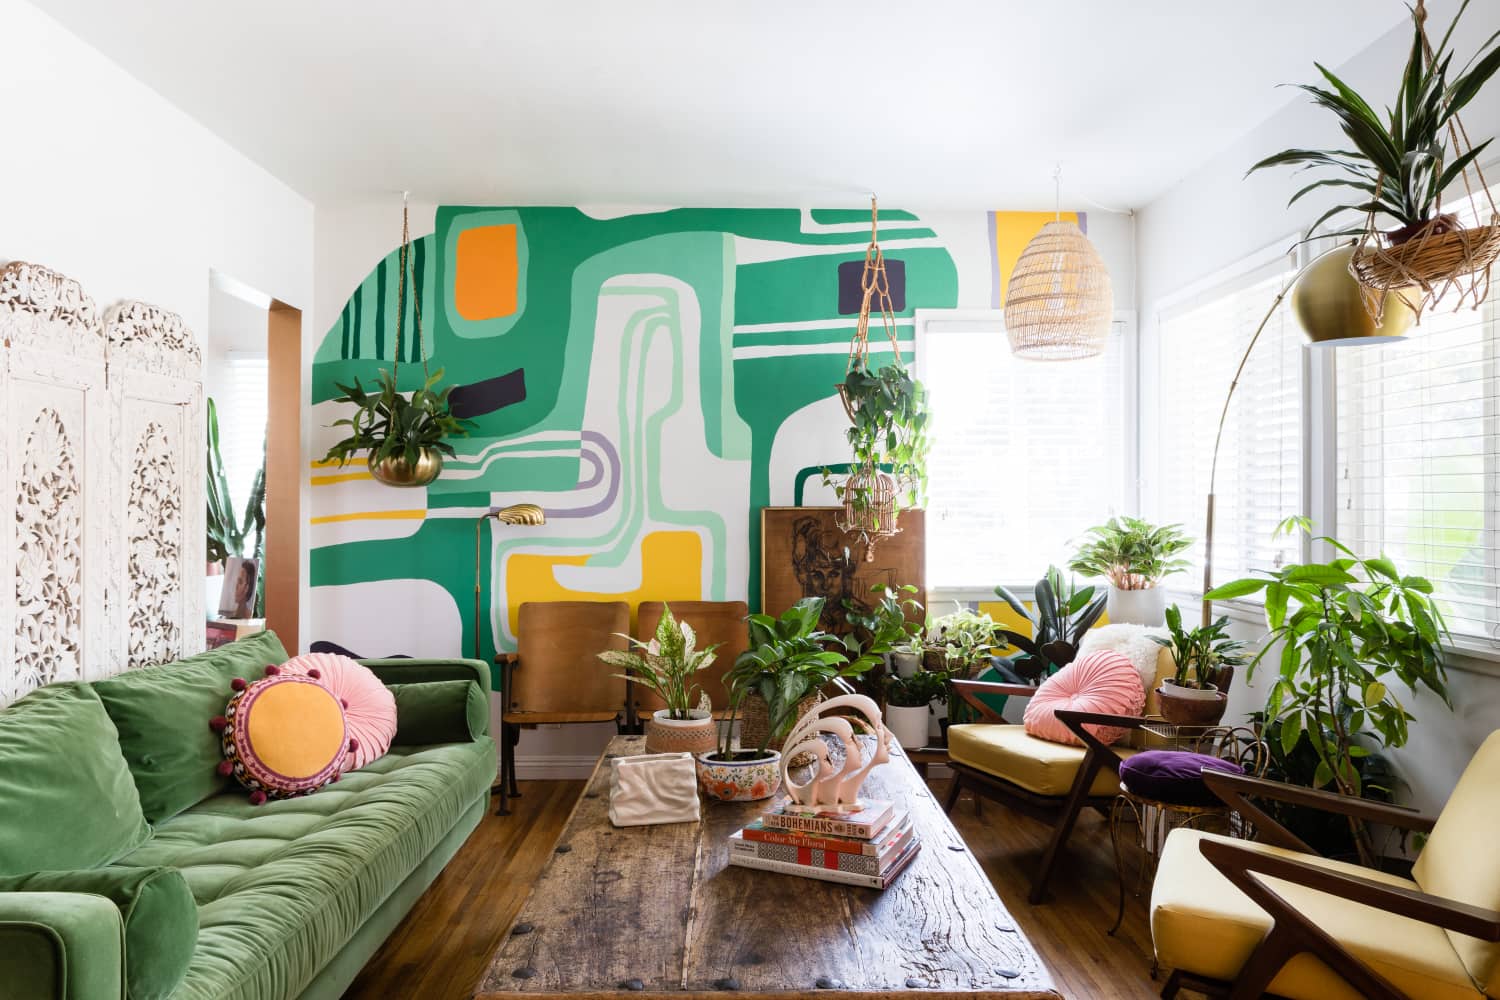 Colorful DIY Mural Ideas That Are Affordable and DIY-able | Apartment ...